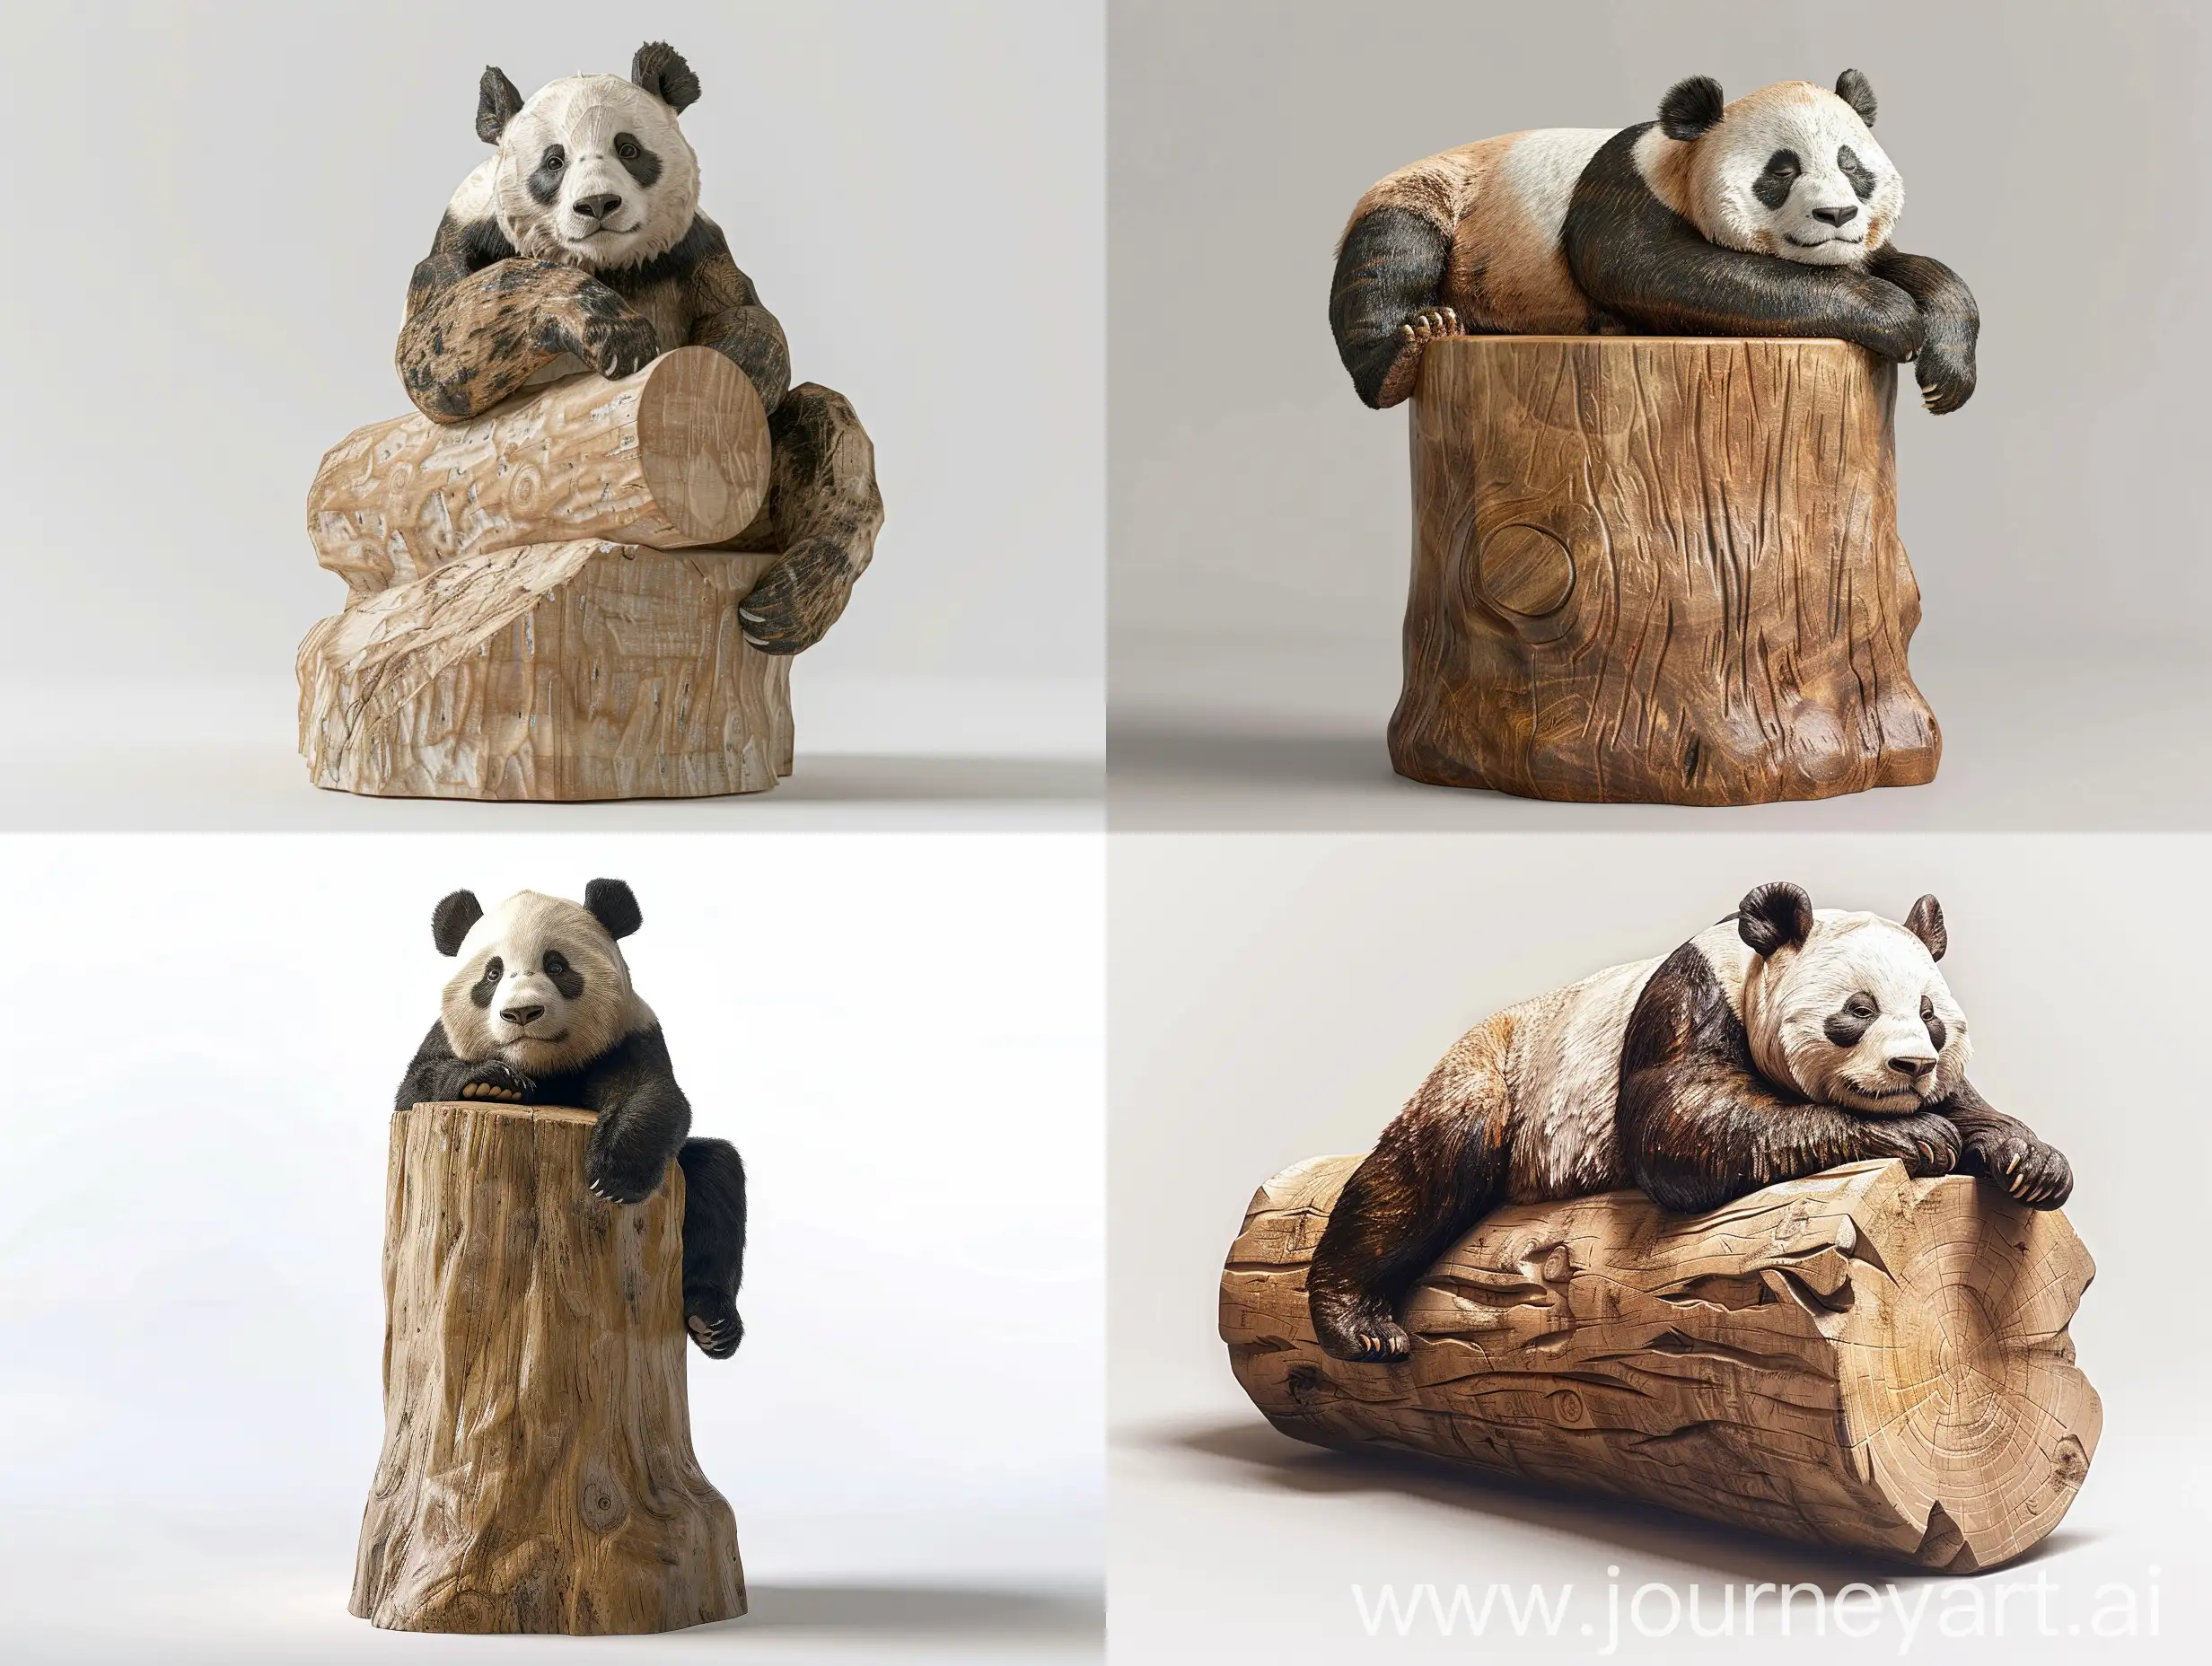 Realistic-Wooden-Panda-Sculpture-on-Cylinder-Professional-Wood-Carving-Art